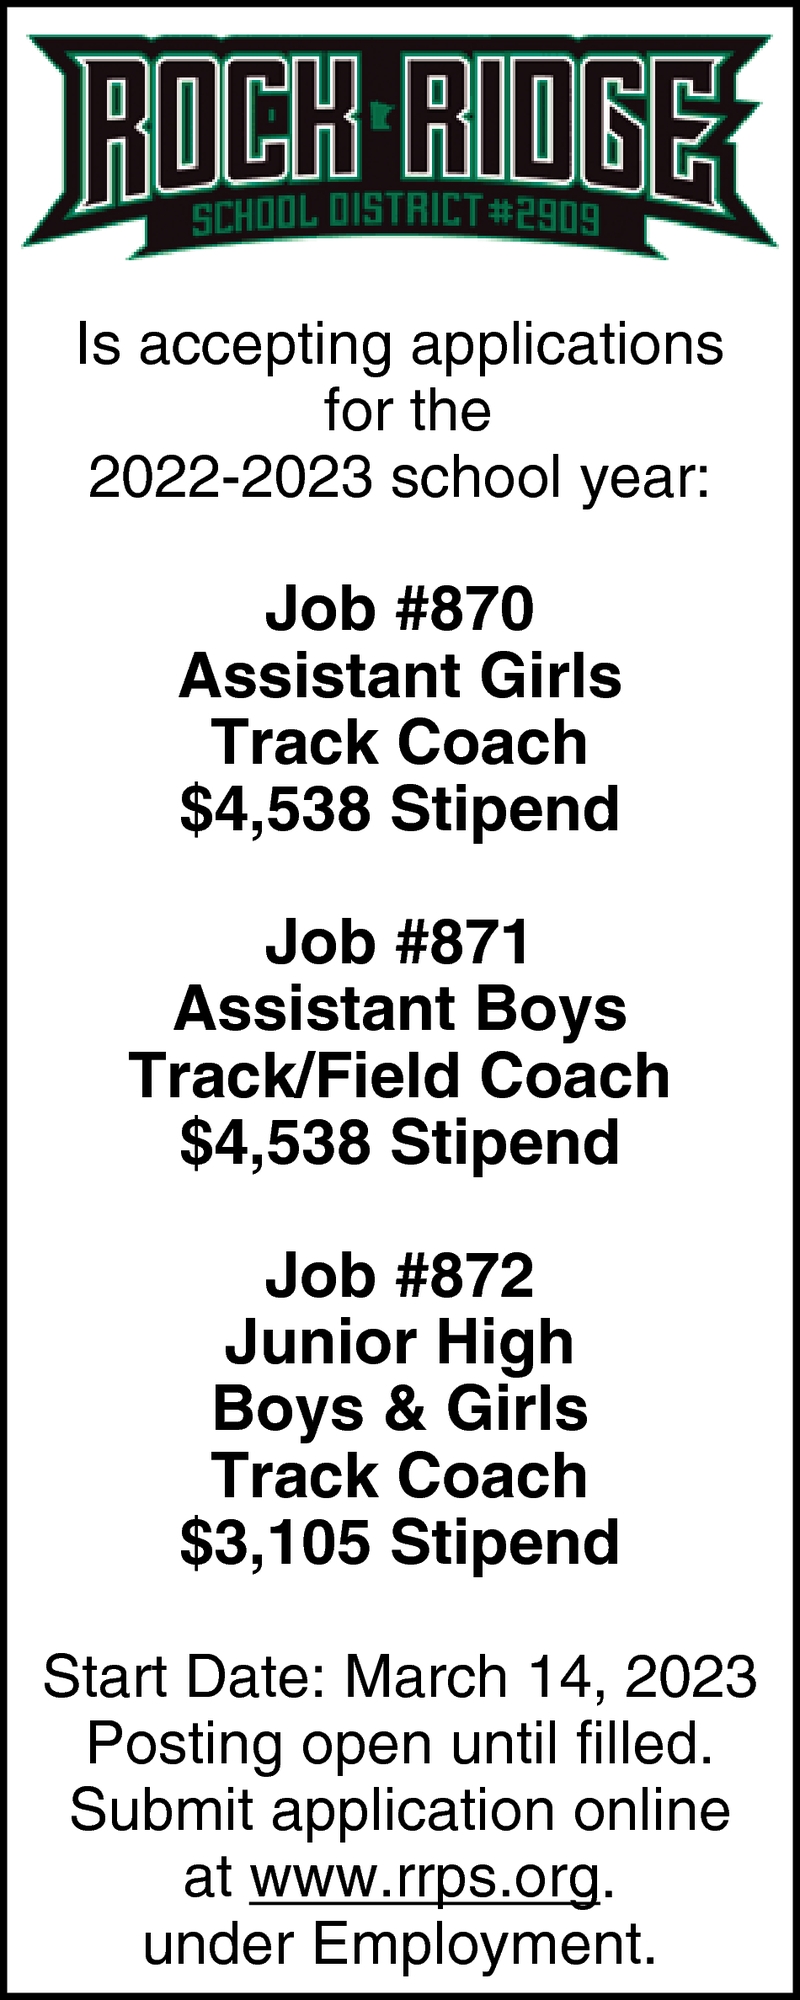 Assistant Girls Track Coach, Assistant Boys Track/Field Coach, Junior High Boys & Girls Track Coach